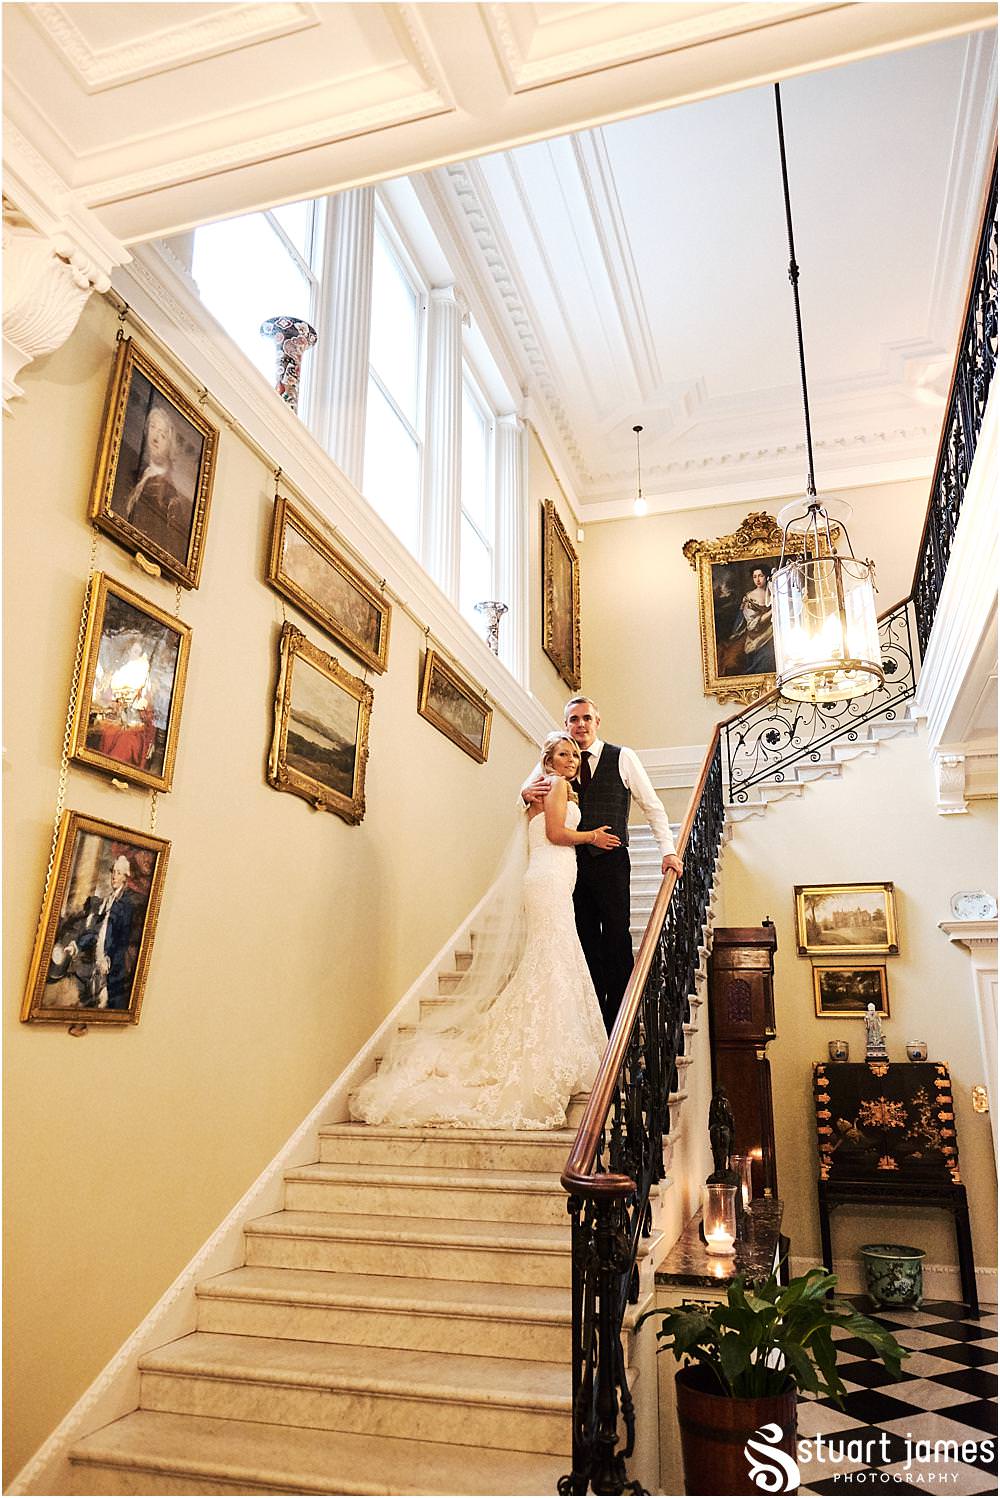 Creative portraits on the grand staircase at Weston Park in Staffordshire by Documentary Wedding Photographer Stuart James